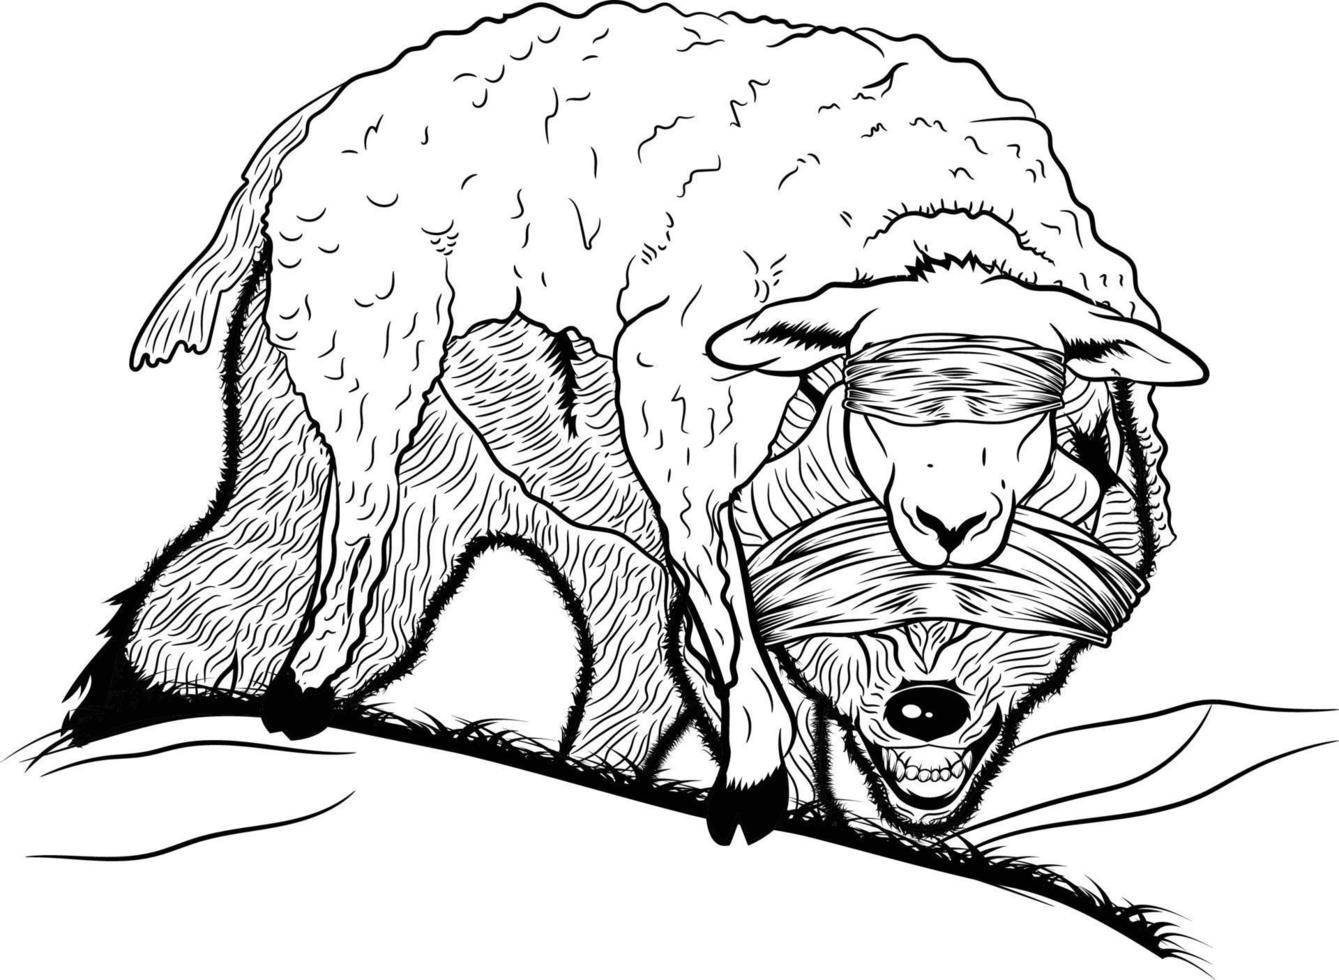 Fox Sheep Black And White Vector Graphic Illustration